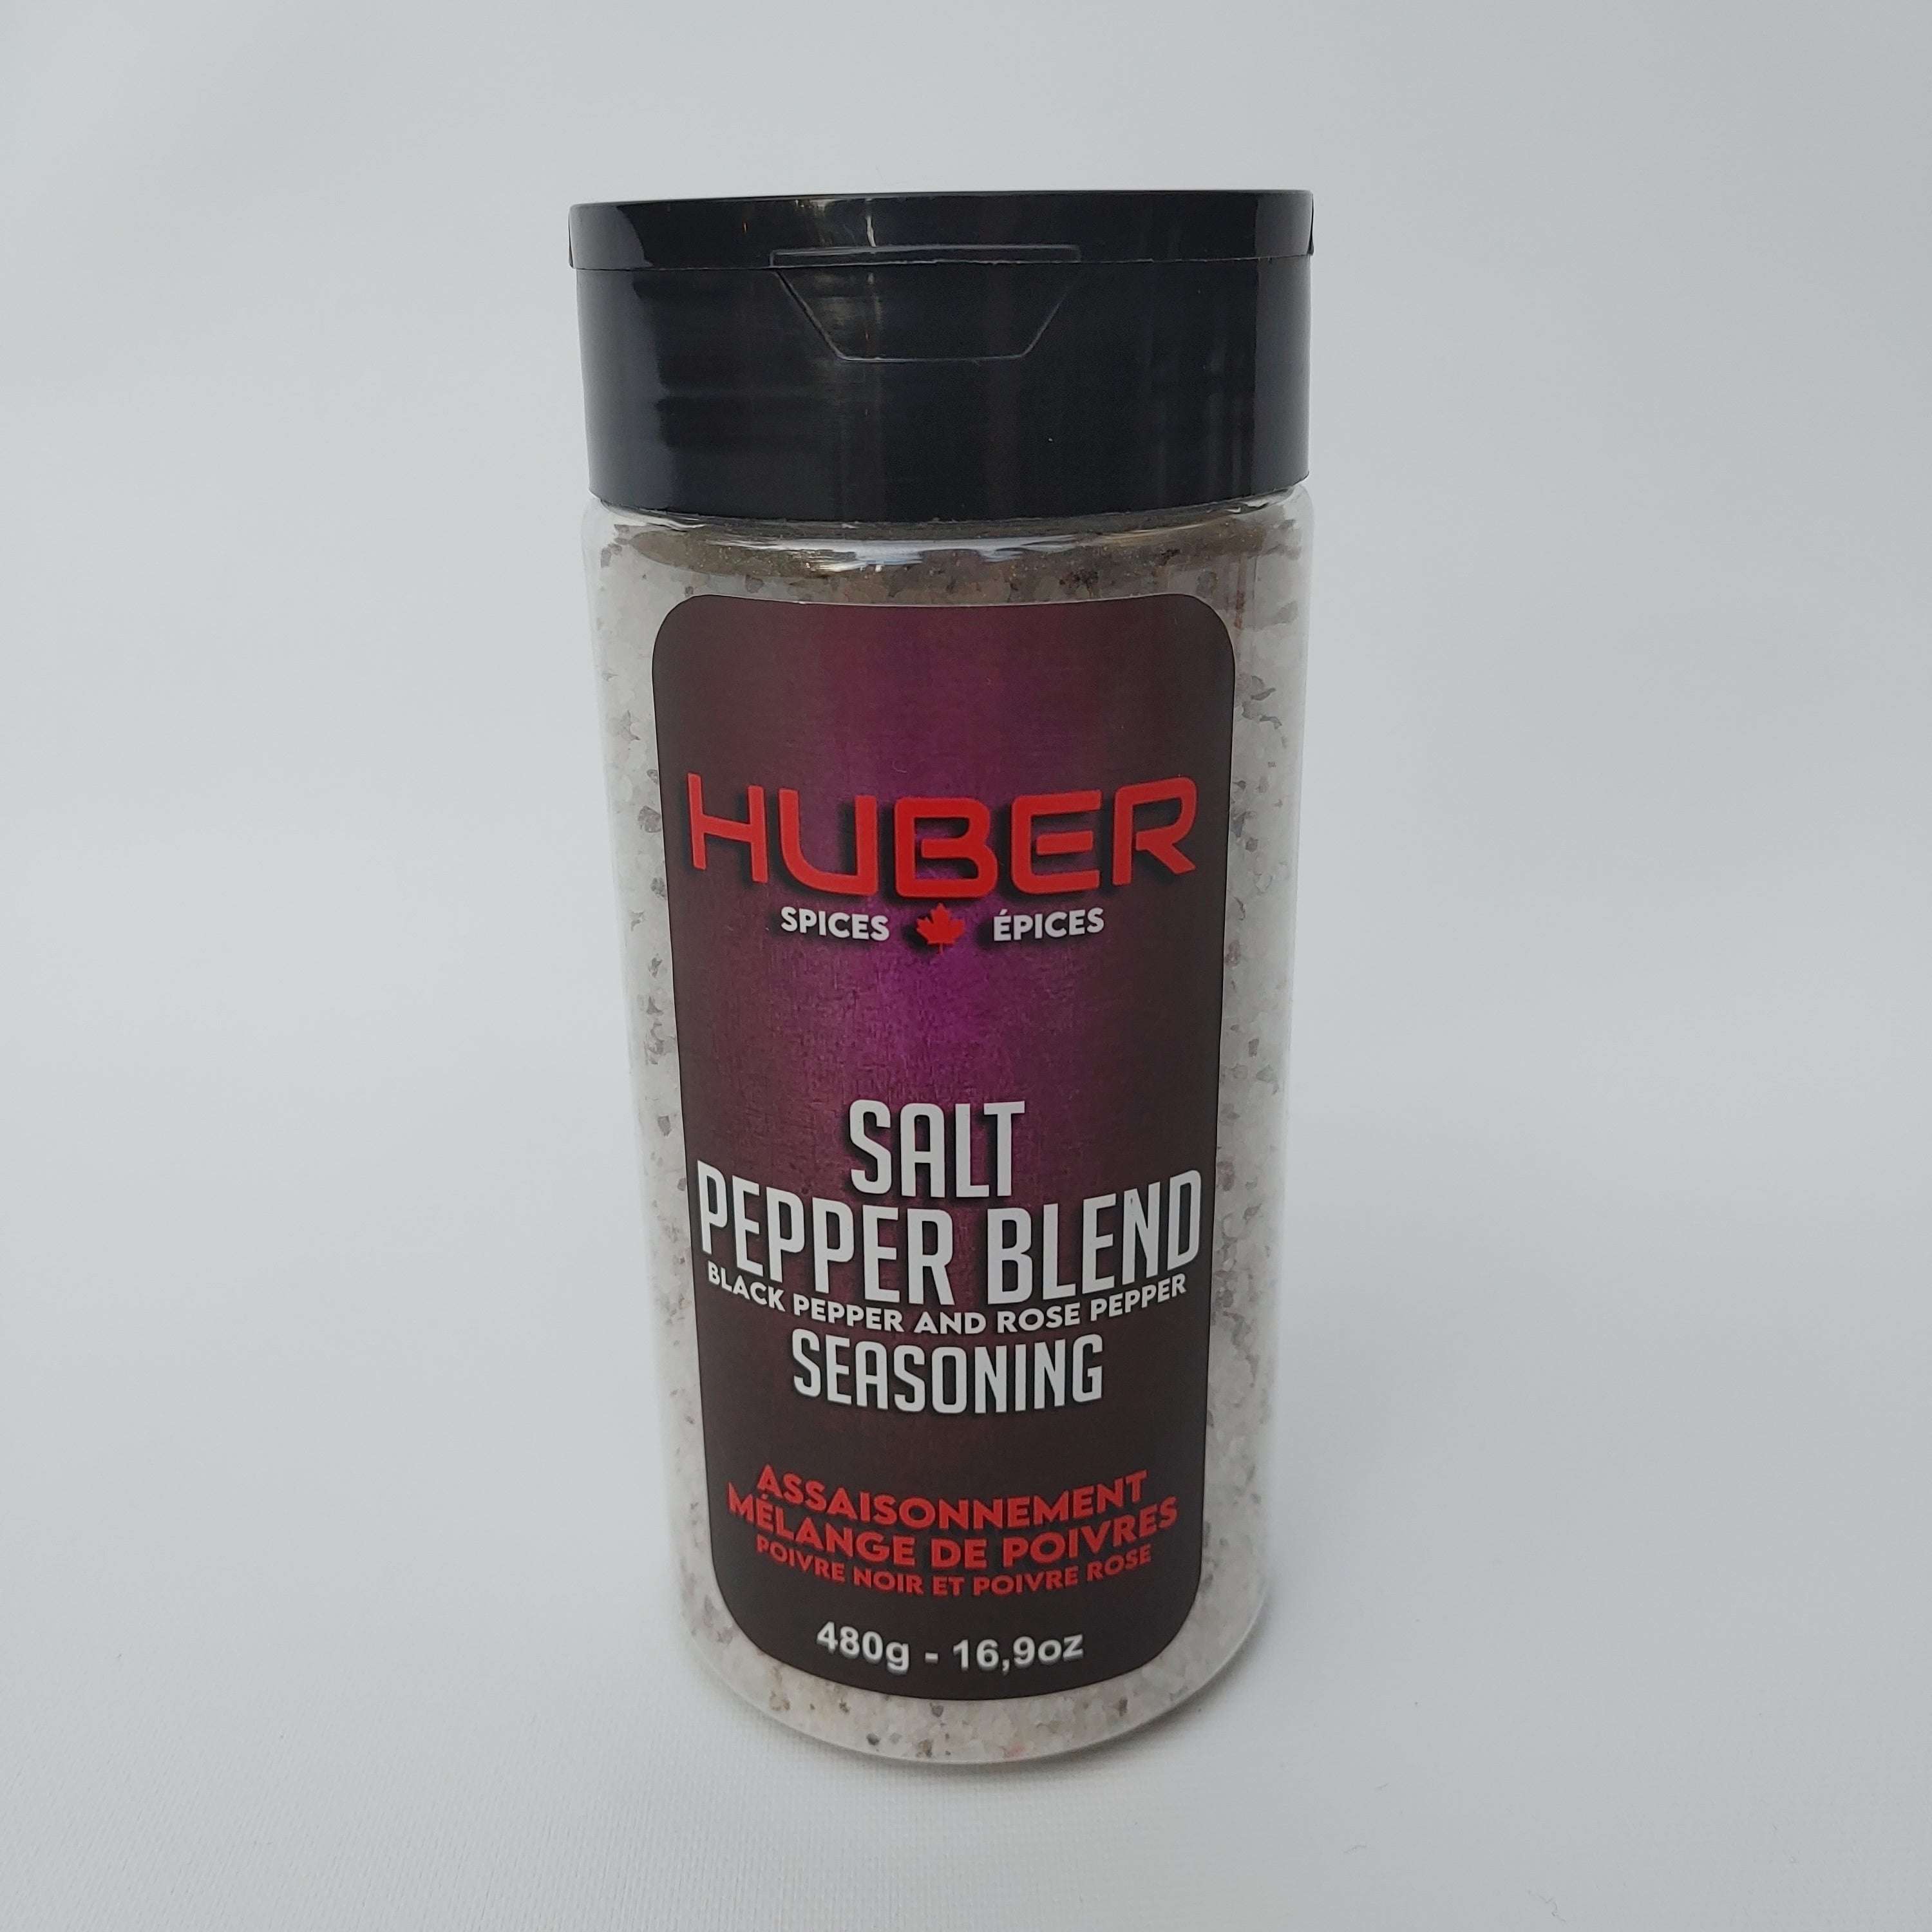 HUBER - Salt Pepper Blend - FINAL SALE - EXPIRED or CLOSE TO EXPIRY